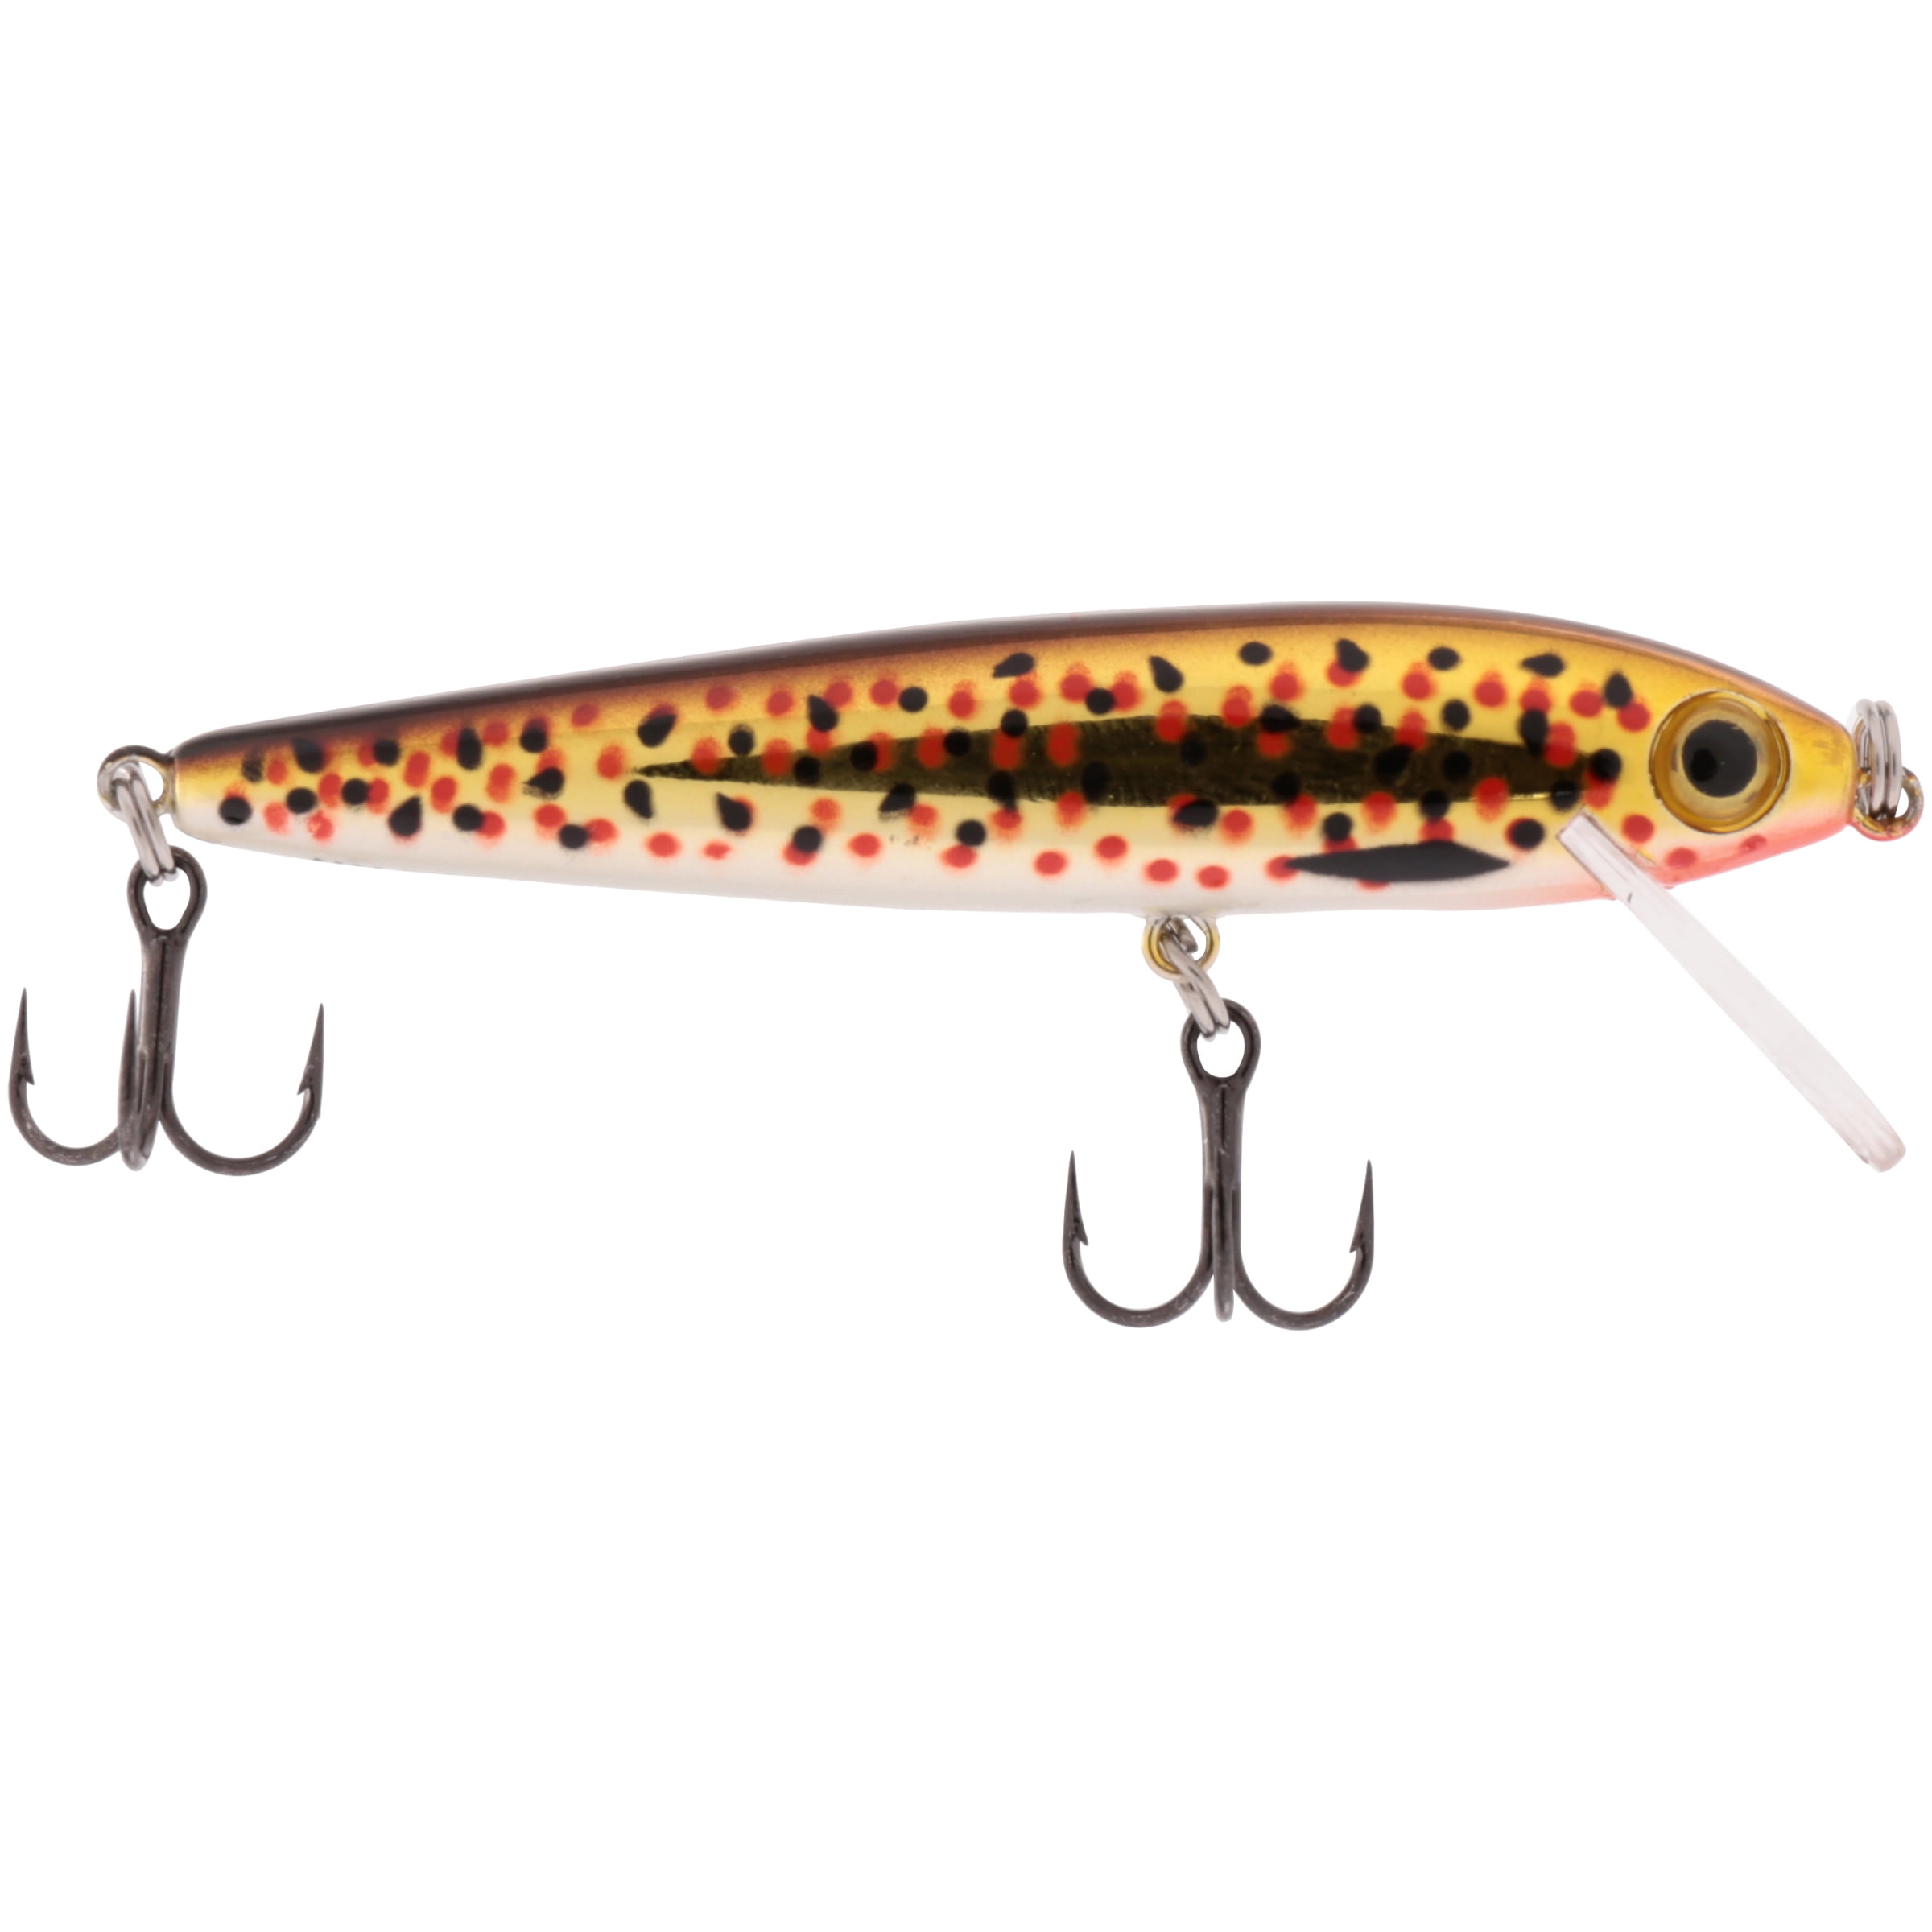  Rebel Lures Tracdown Minnow Fish Catcher, Cutthroat Trout, 2  1/2 in, 1/8 oz : Sports & Outdoors